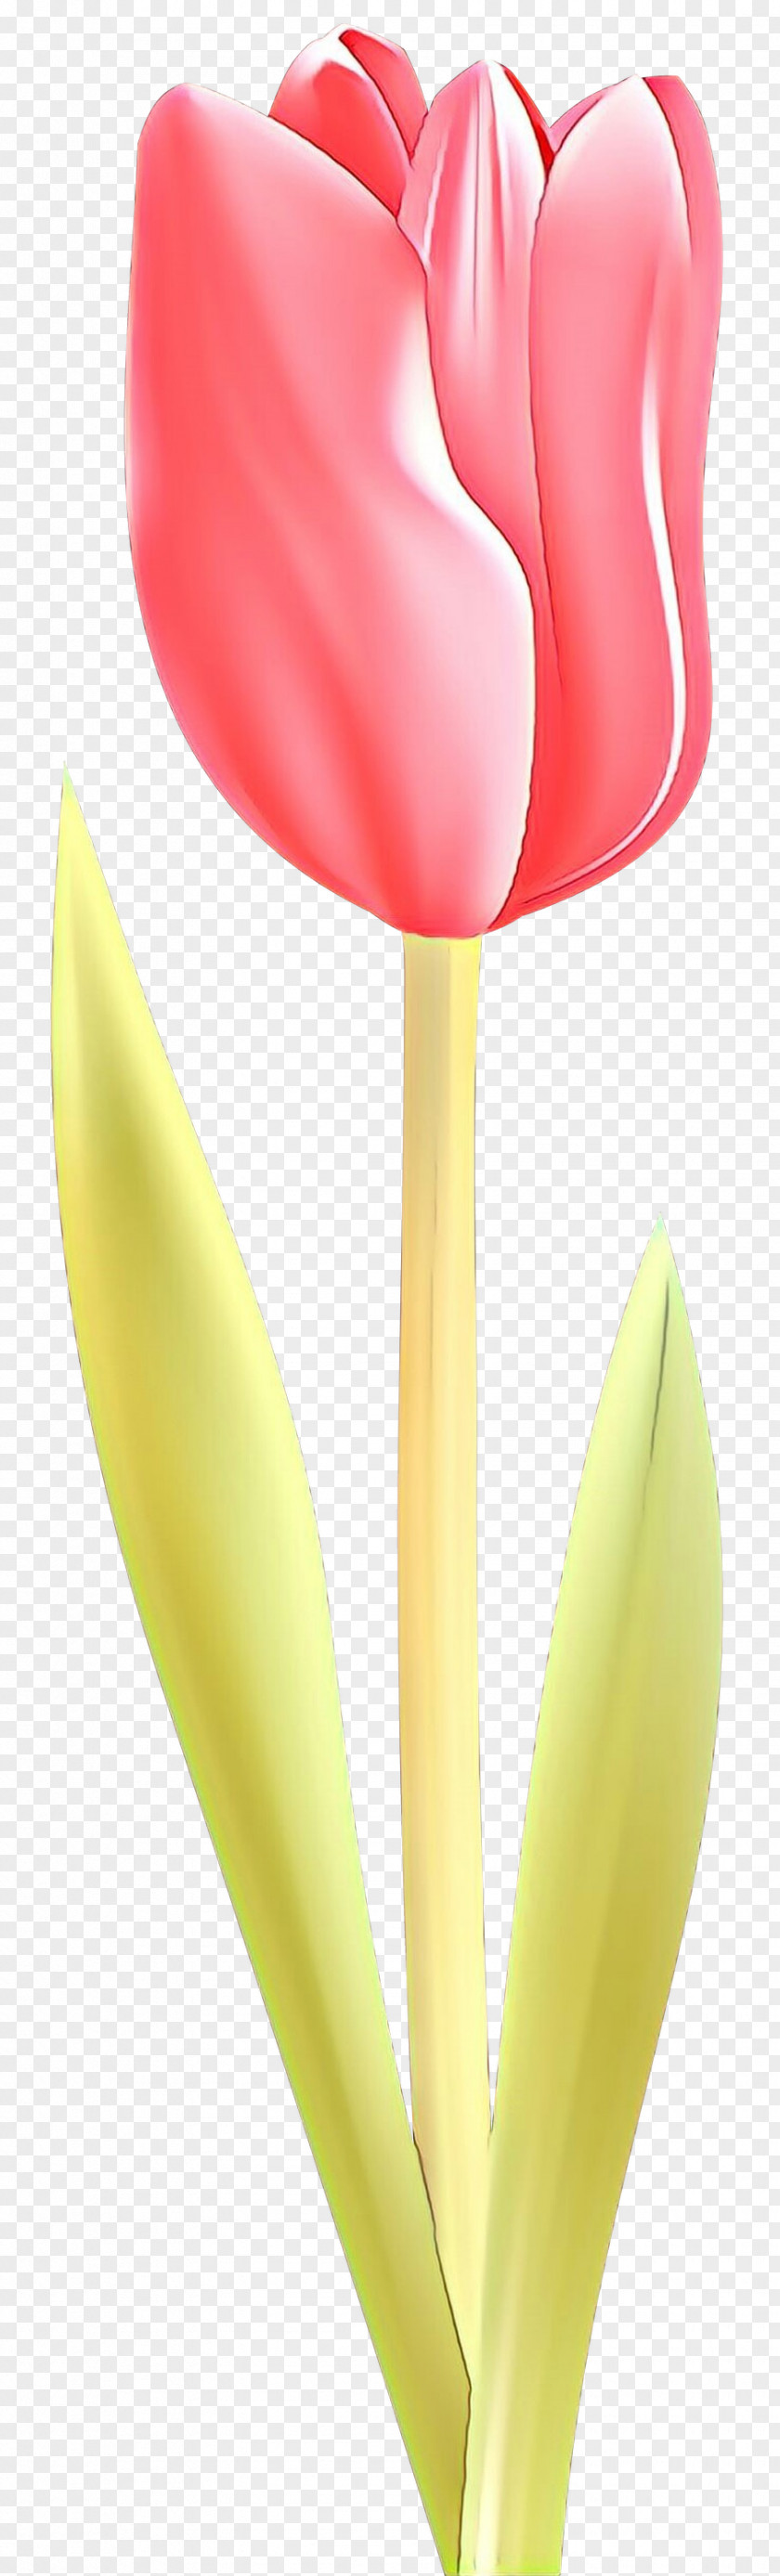 Anthurium Lily Family Yellow Tulip Petal Close-up Flower PNG